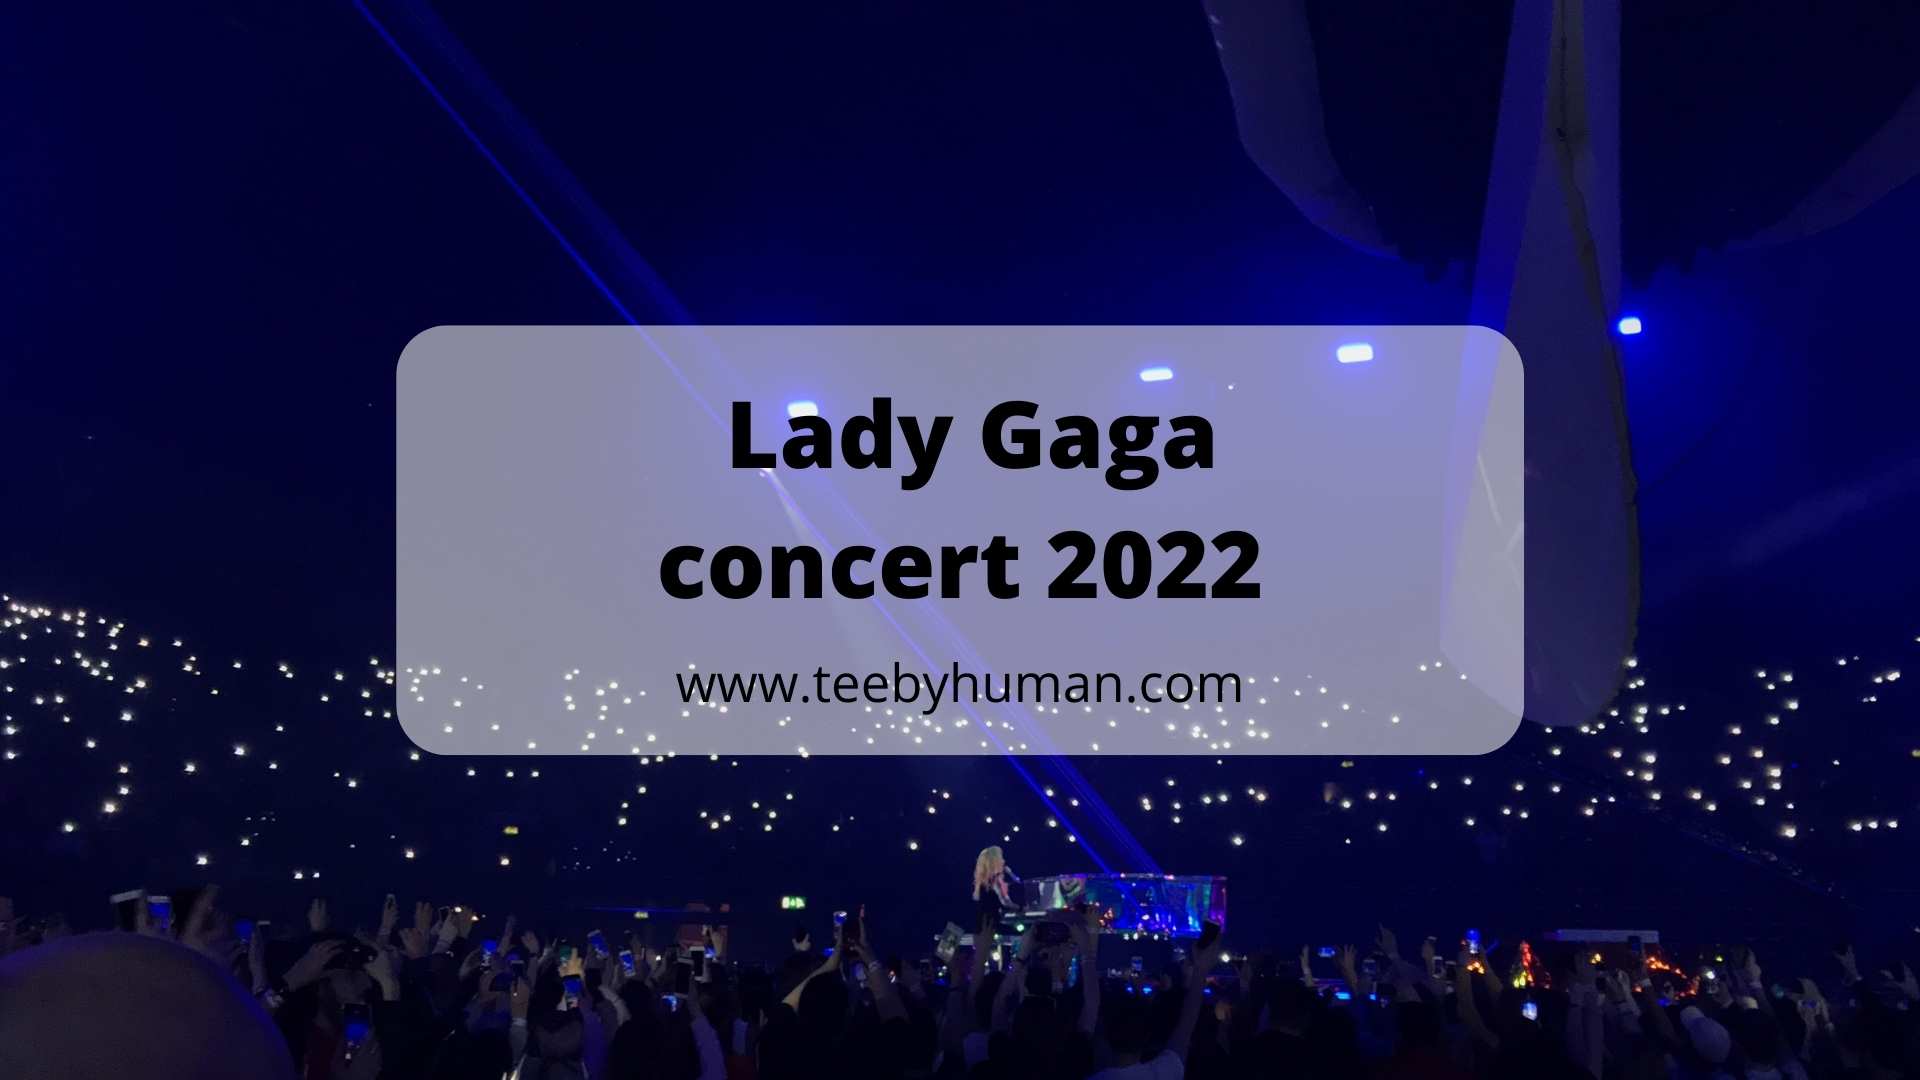 15 Things Lady Gaga concert 2022 Fans Need